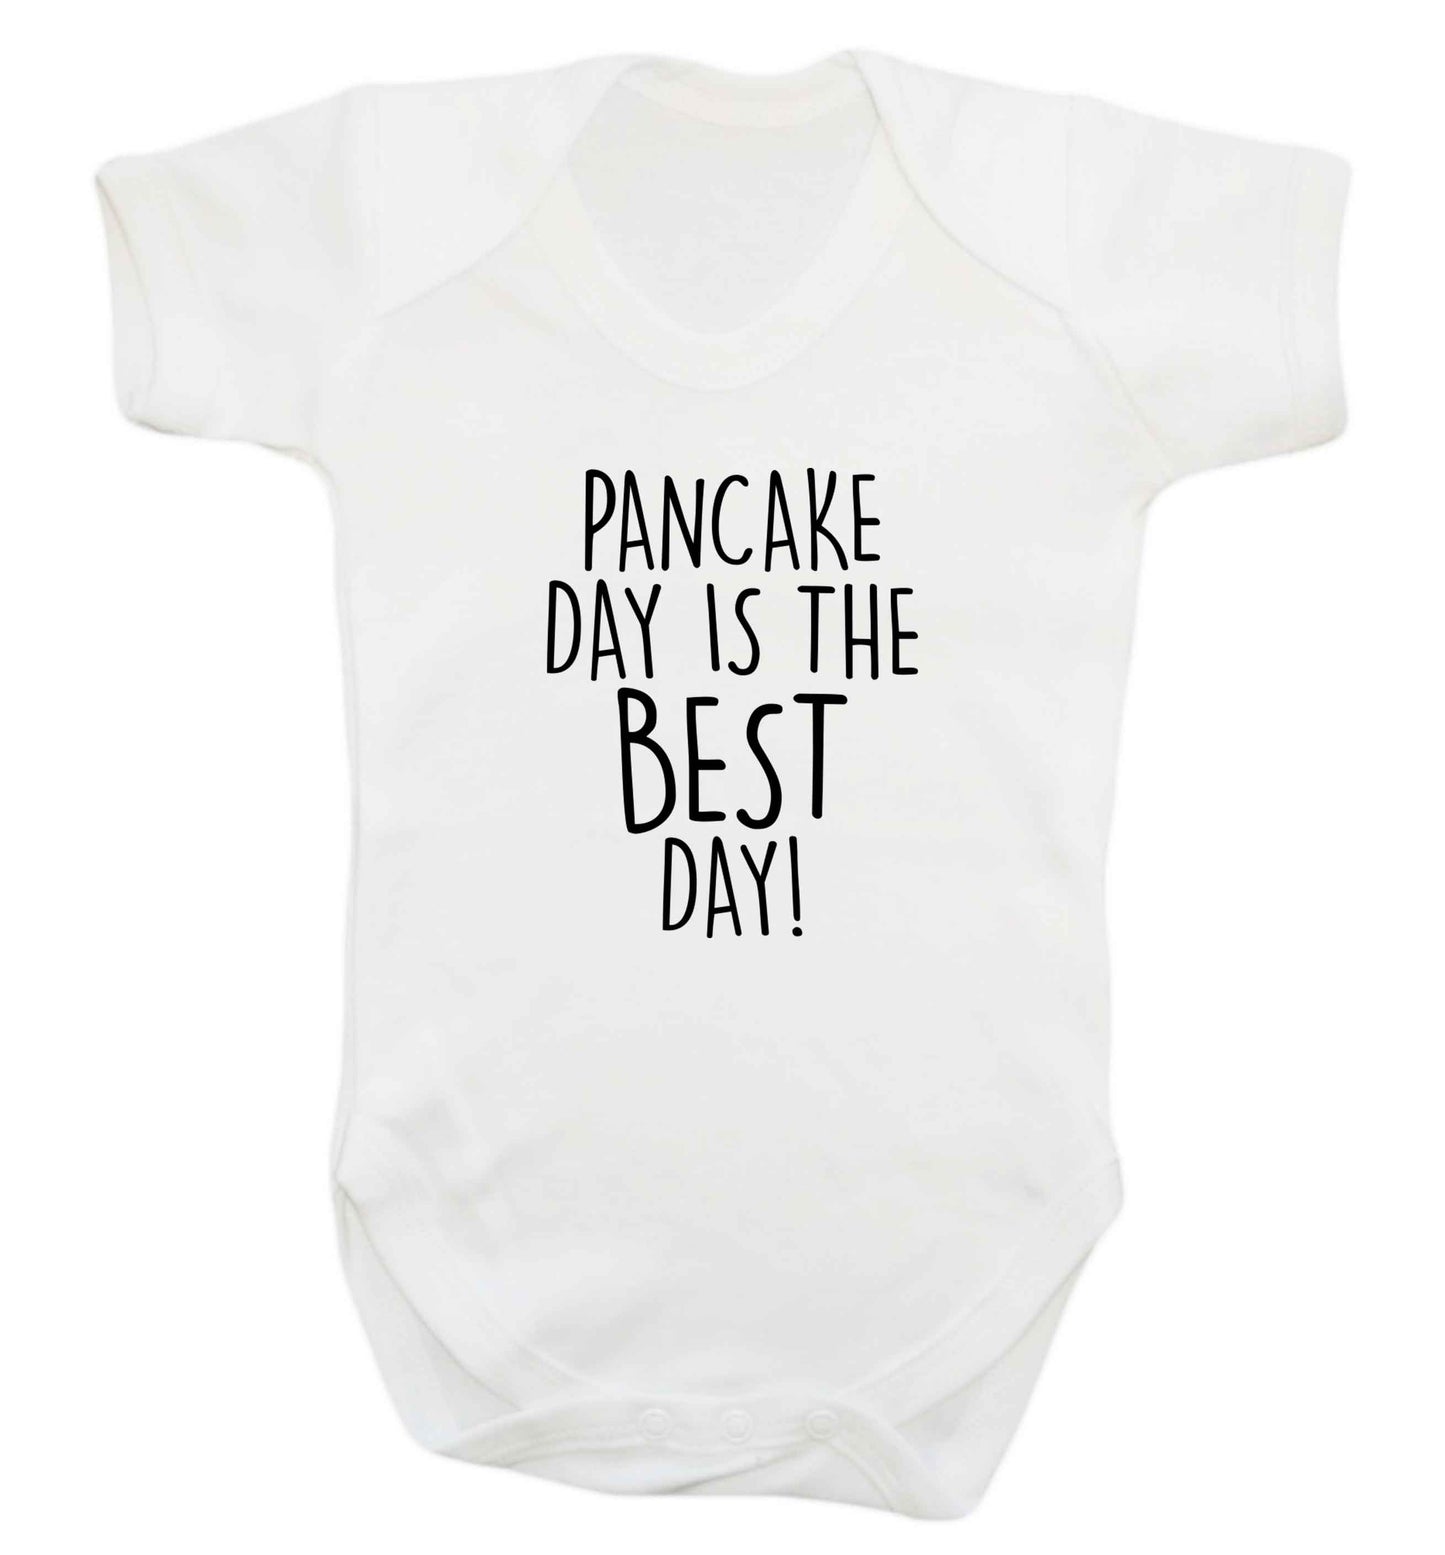 Pancake day is the best day baby vest white 18-24 months